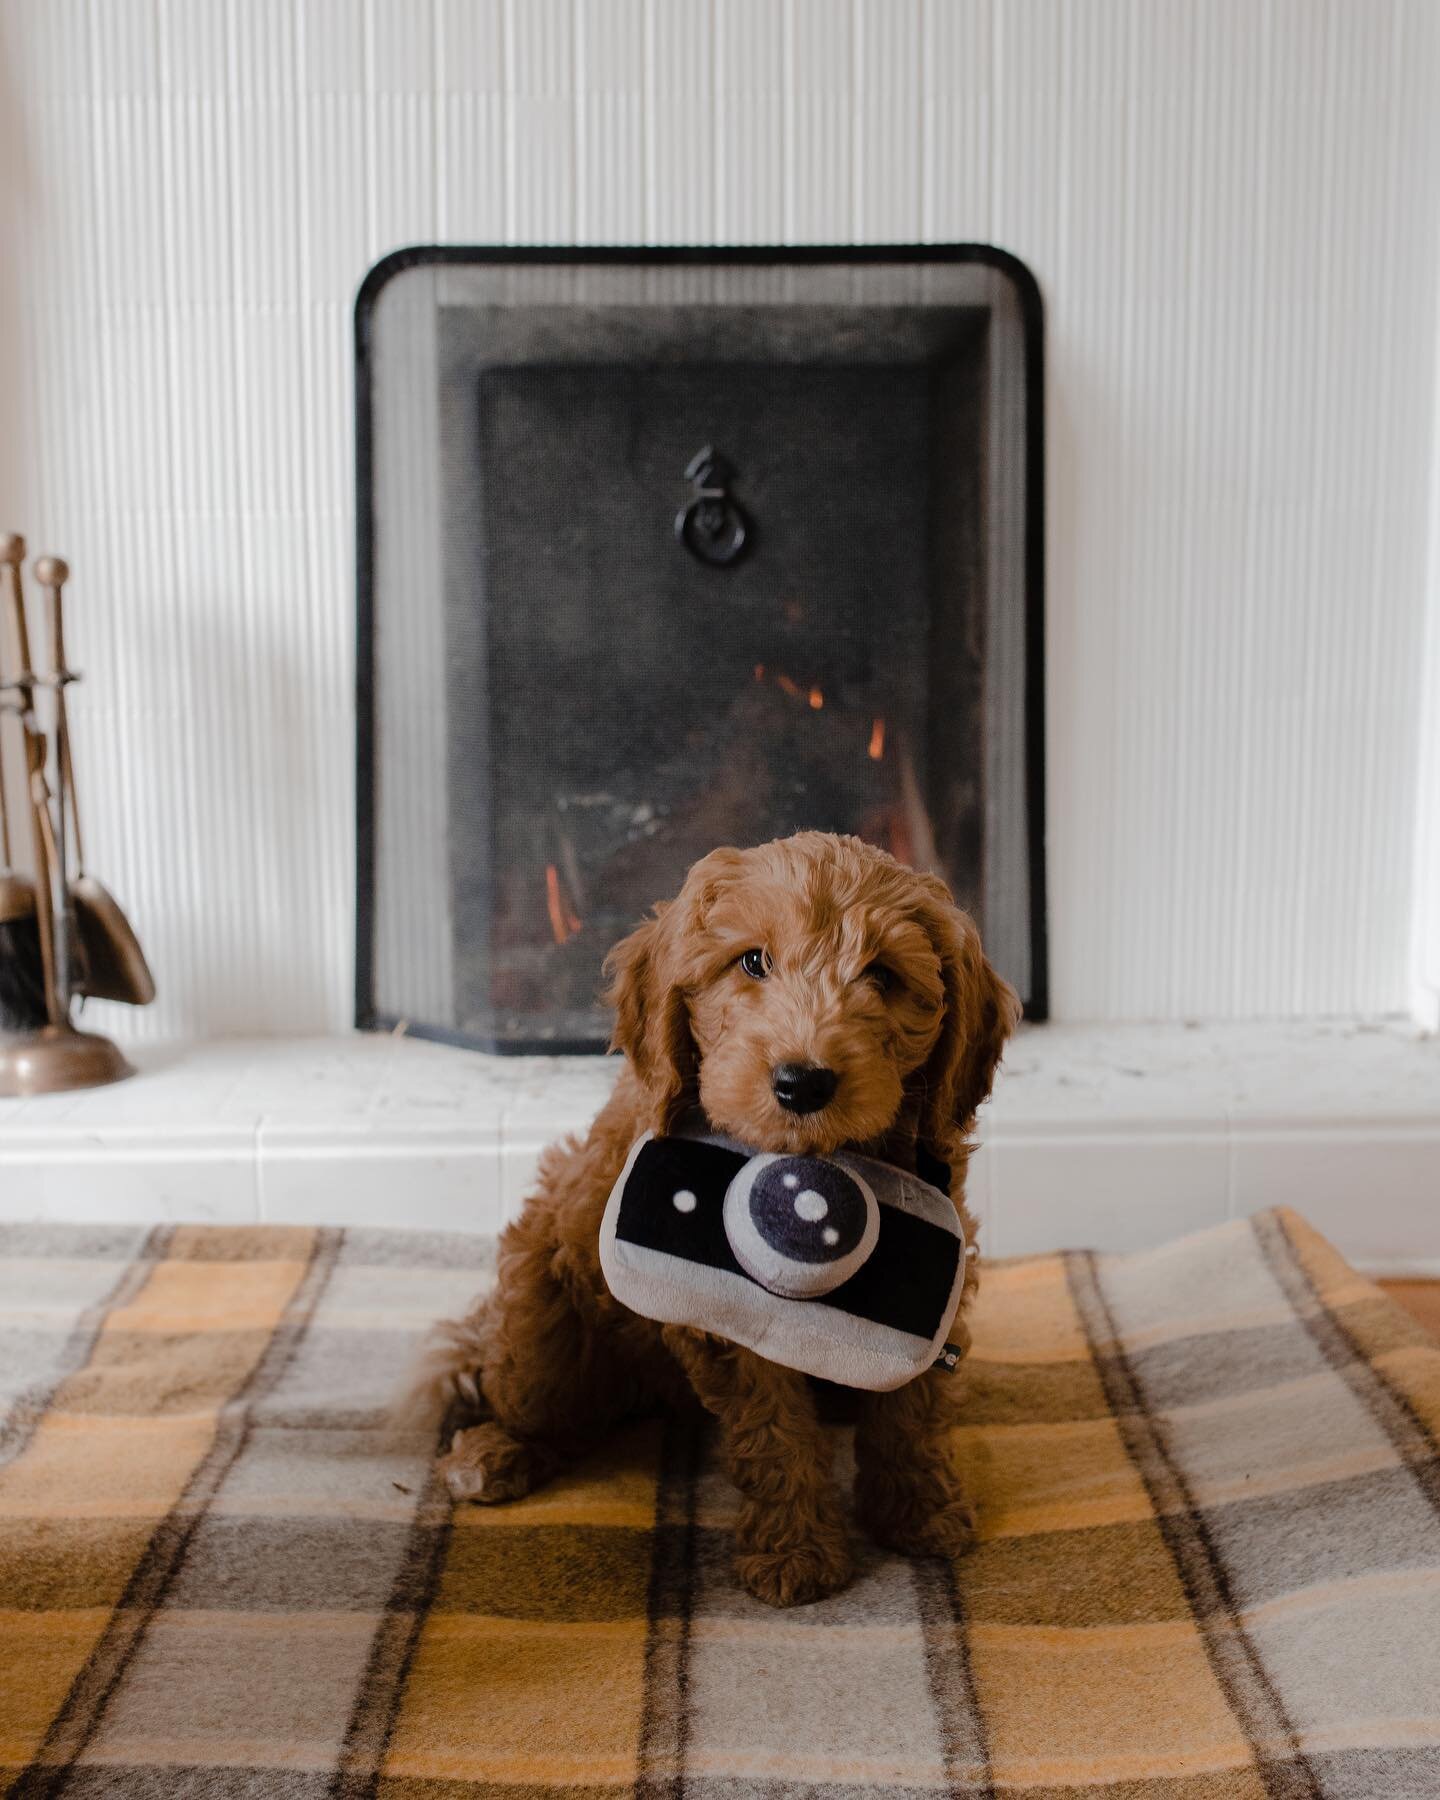 Introducing&hellip; the newest Furtographer on the team who puts the &ldquo;wild&rdquo; in Wallace &amp; Wild. Meet Humphrey Wiggleton Wallace! He specialises in pawtraits, and he&rsquo;s available for bookings now. Rates start at 5 treats and 100 cu